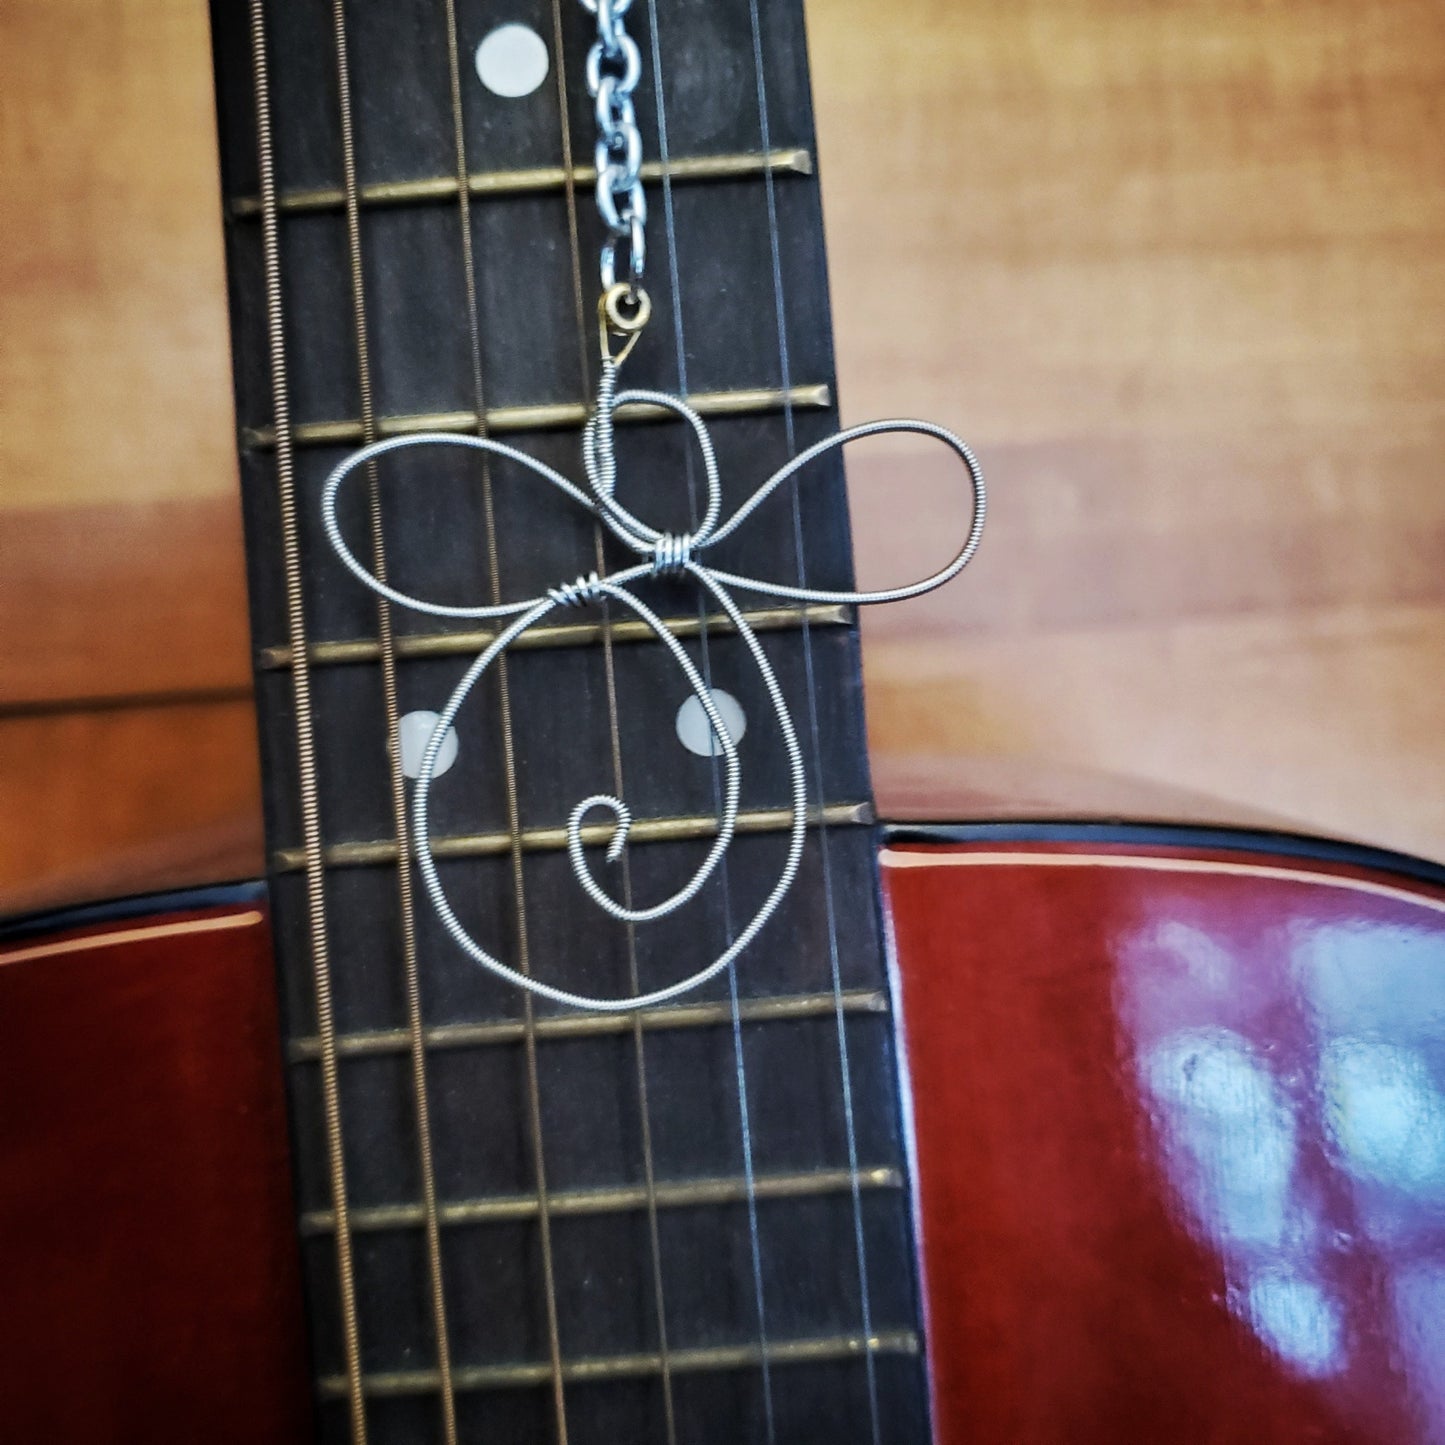 rearview mirror  decoration shaped like an angel made from an upcycled guitar string on the neck of a red guitar